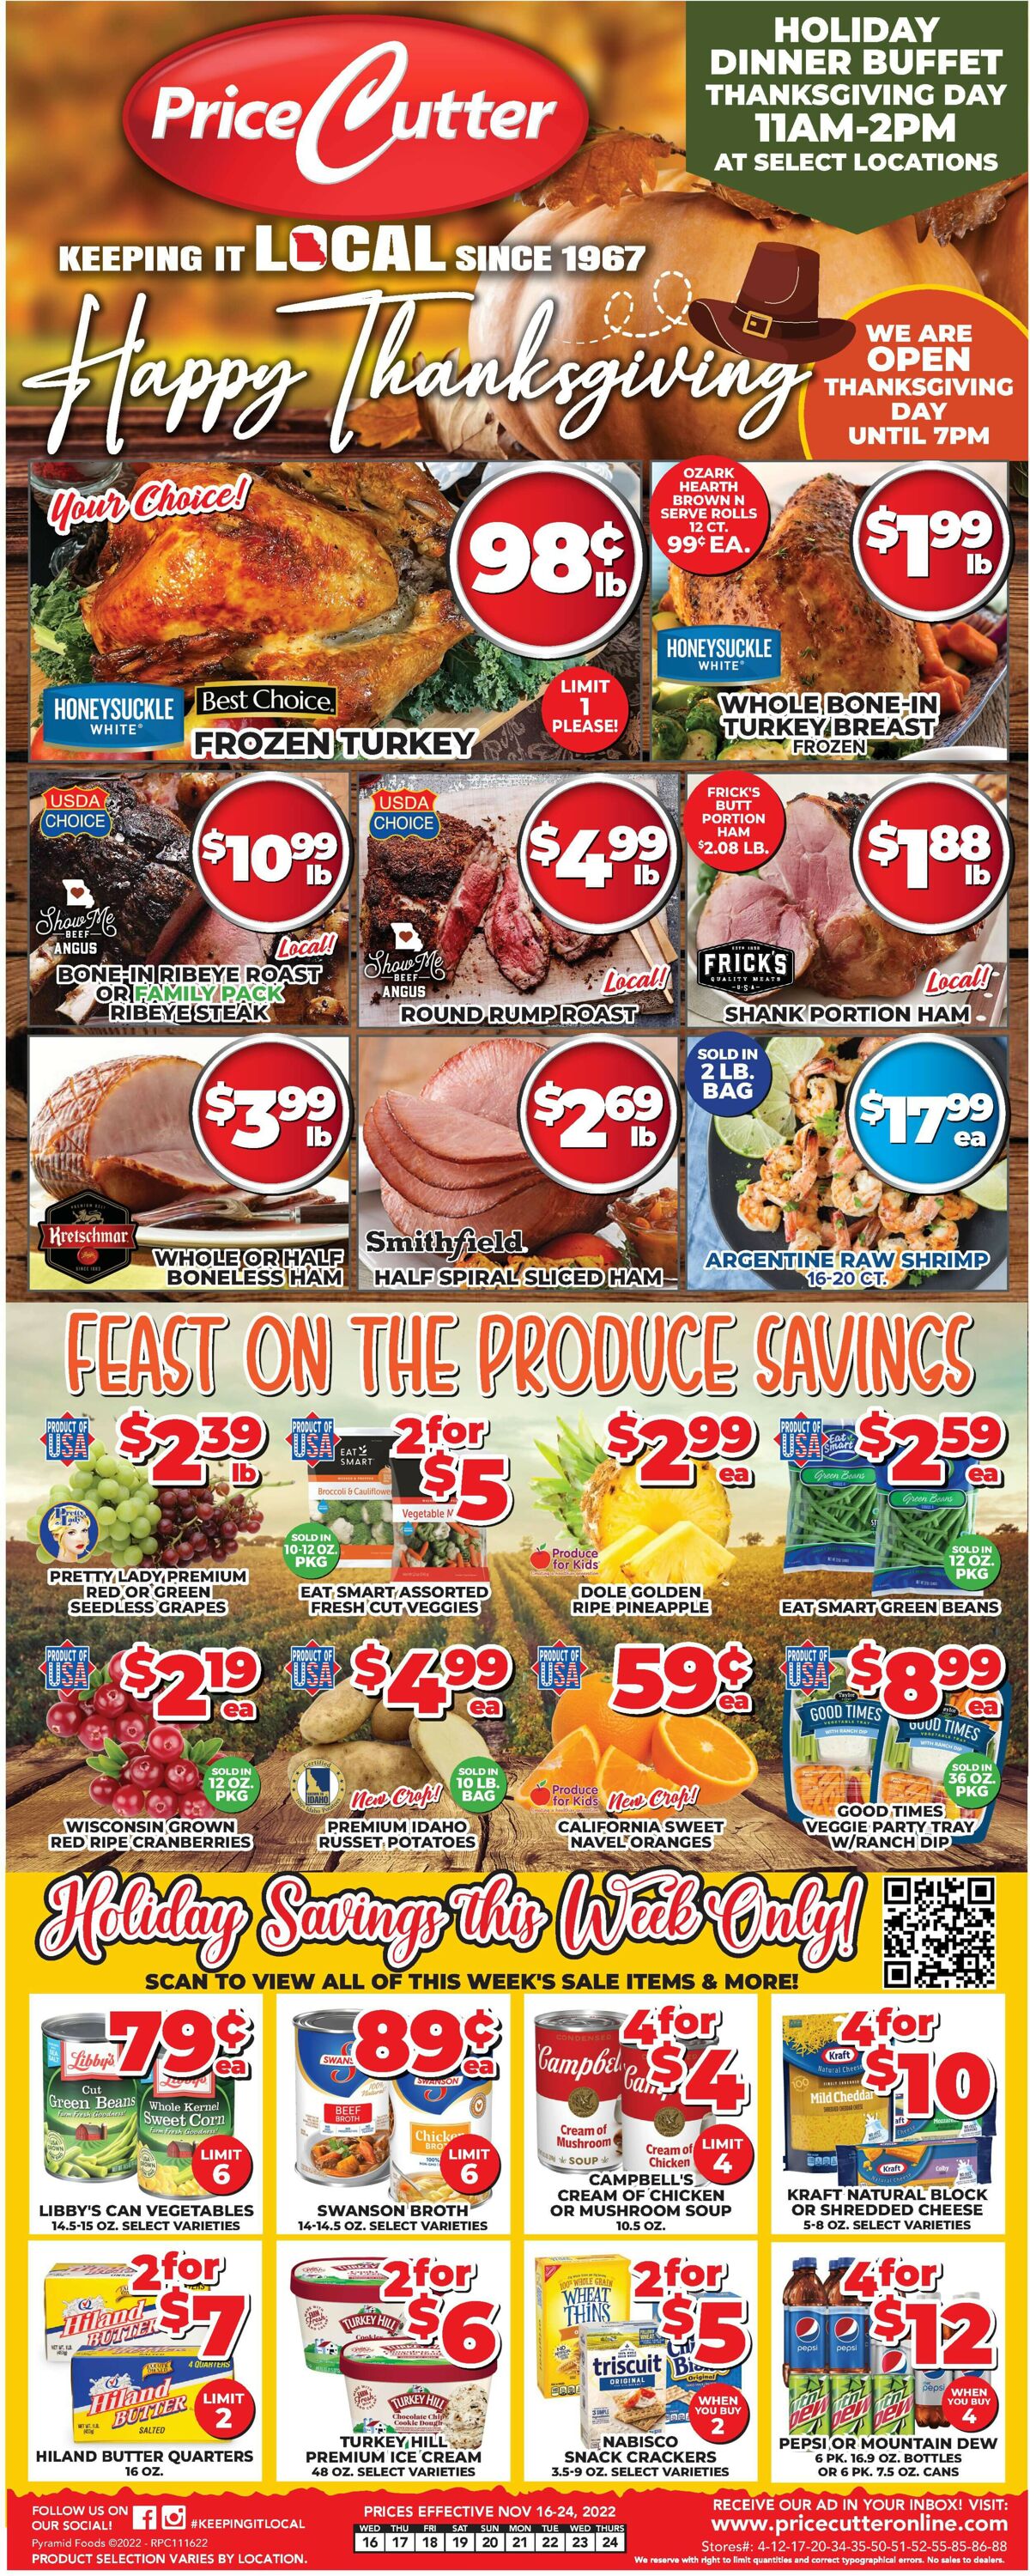 Price Cutter Weekly Ad Circular - valid 11/16-11/24/2022